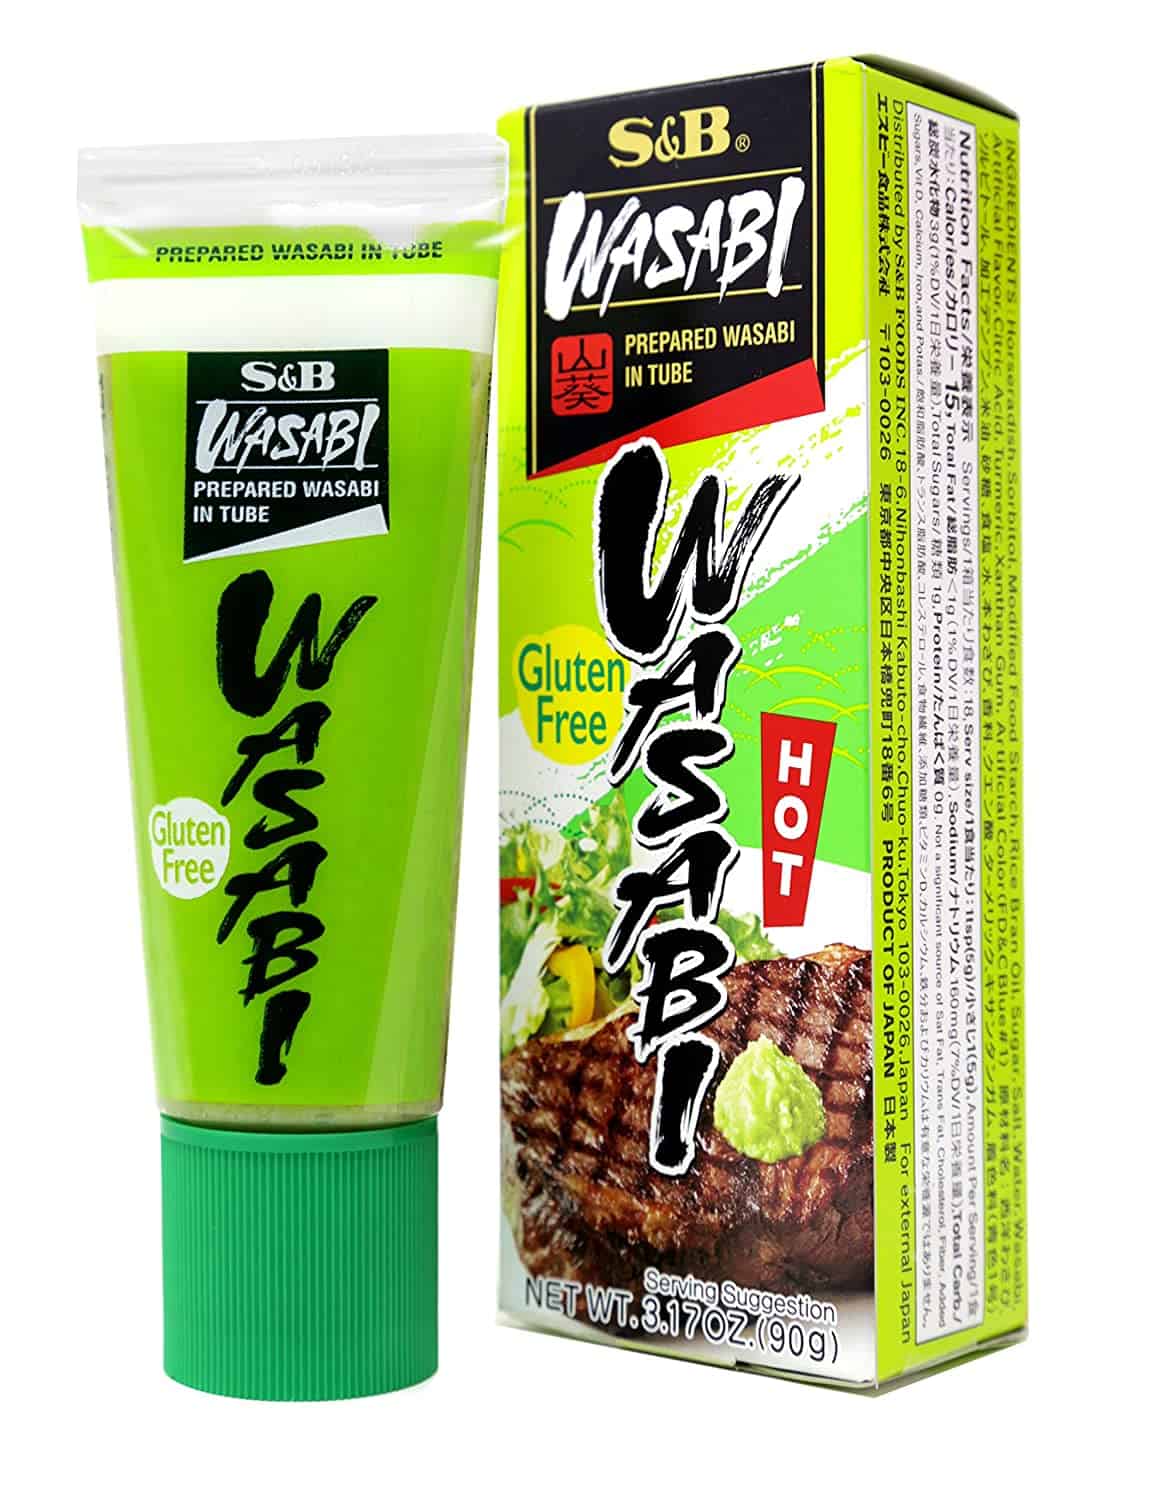 Prepared wasabi as a substitute for mustard powder